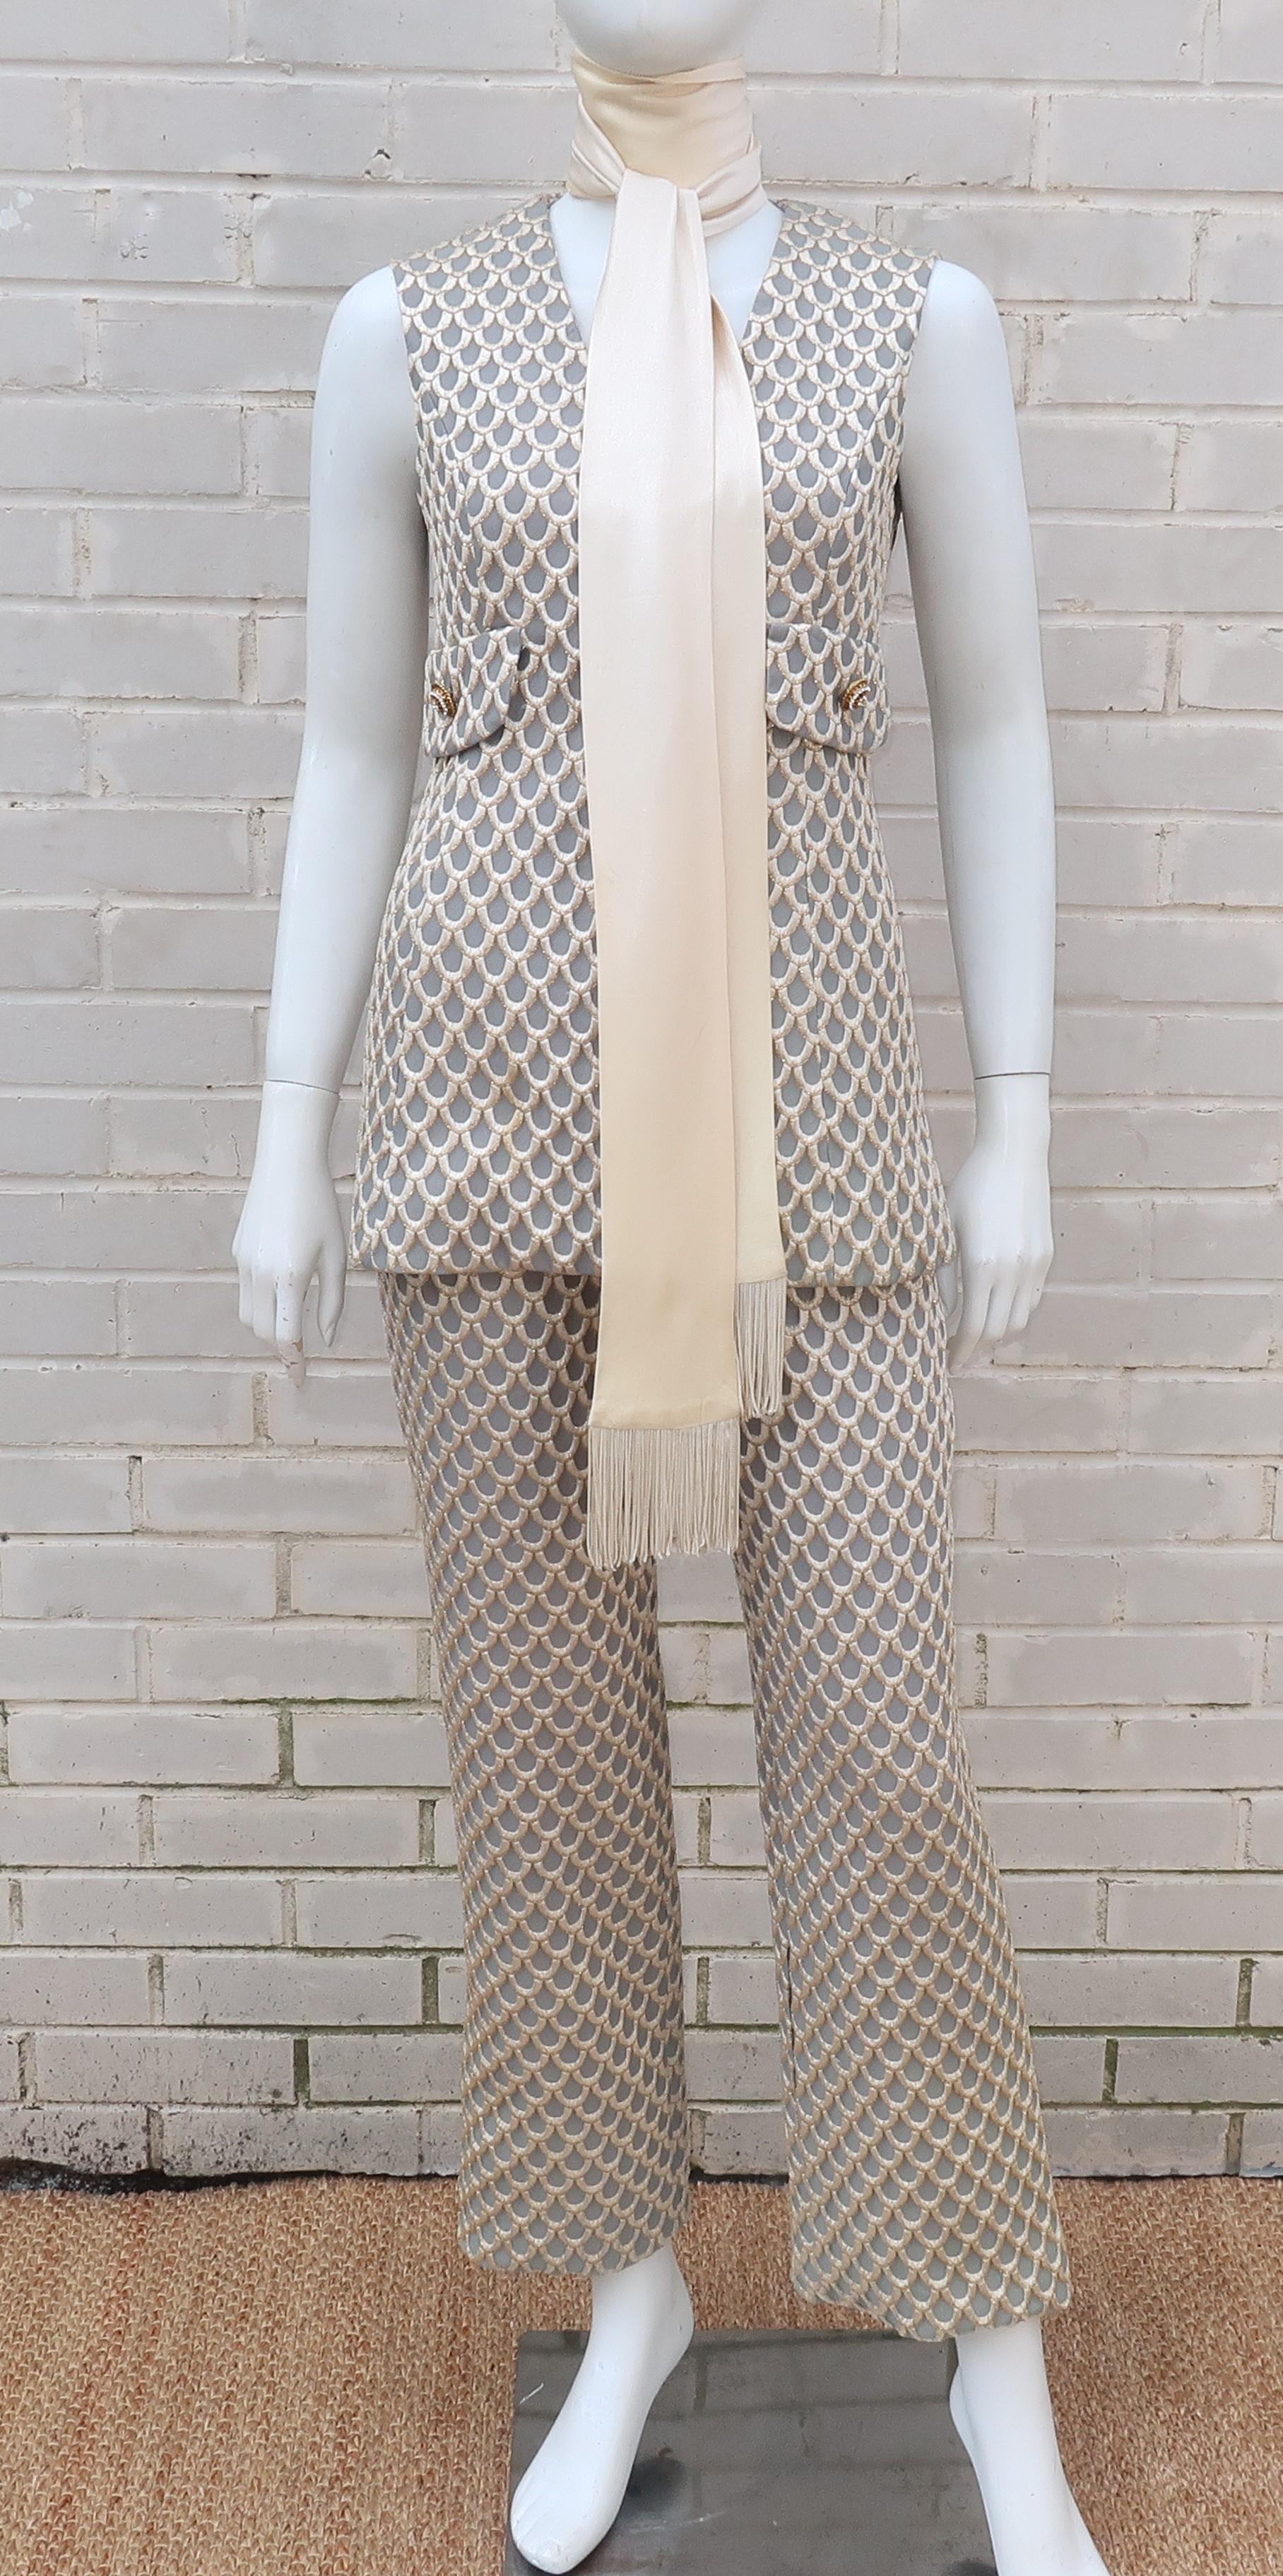 Conjure up a little mod magic with this 1960’s Saks Fifth Avenue three piece pant suit consisting of a maxi vest, flared pants and charmeuse fringed scarf.  The vest and pants are designed with a brocade style fabric in a neutral taupe gray shade